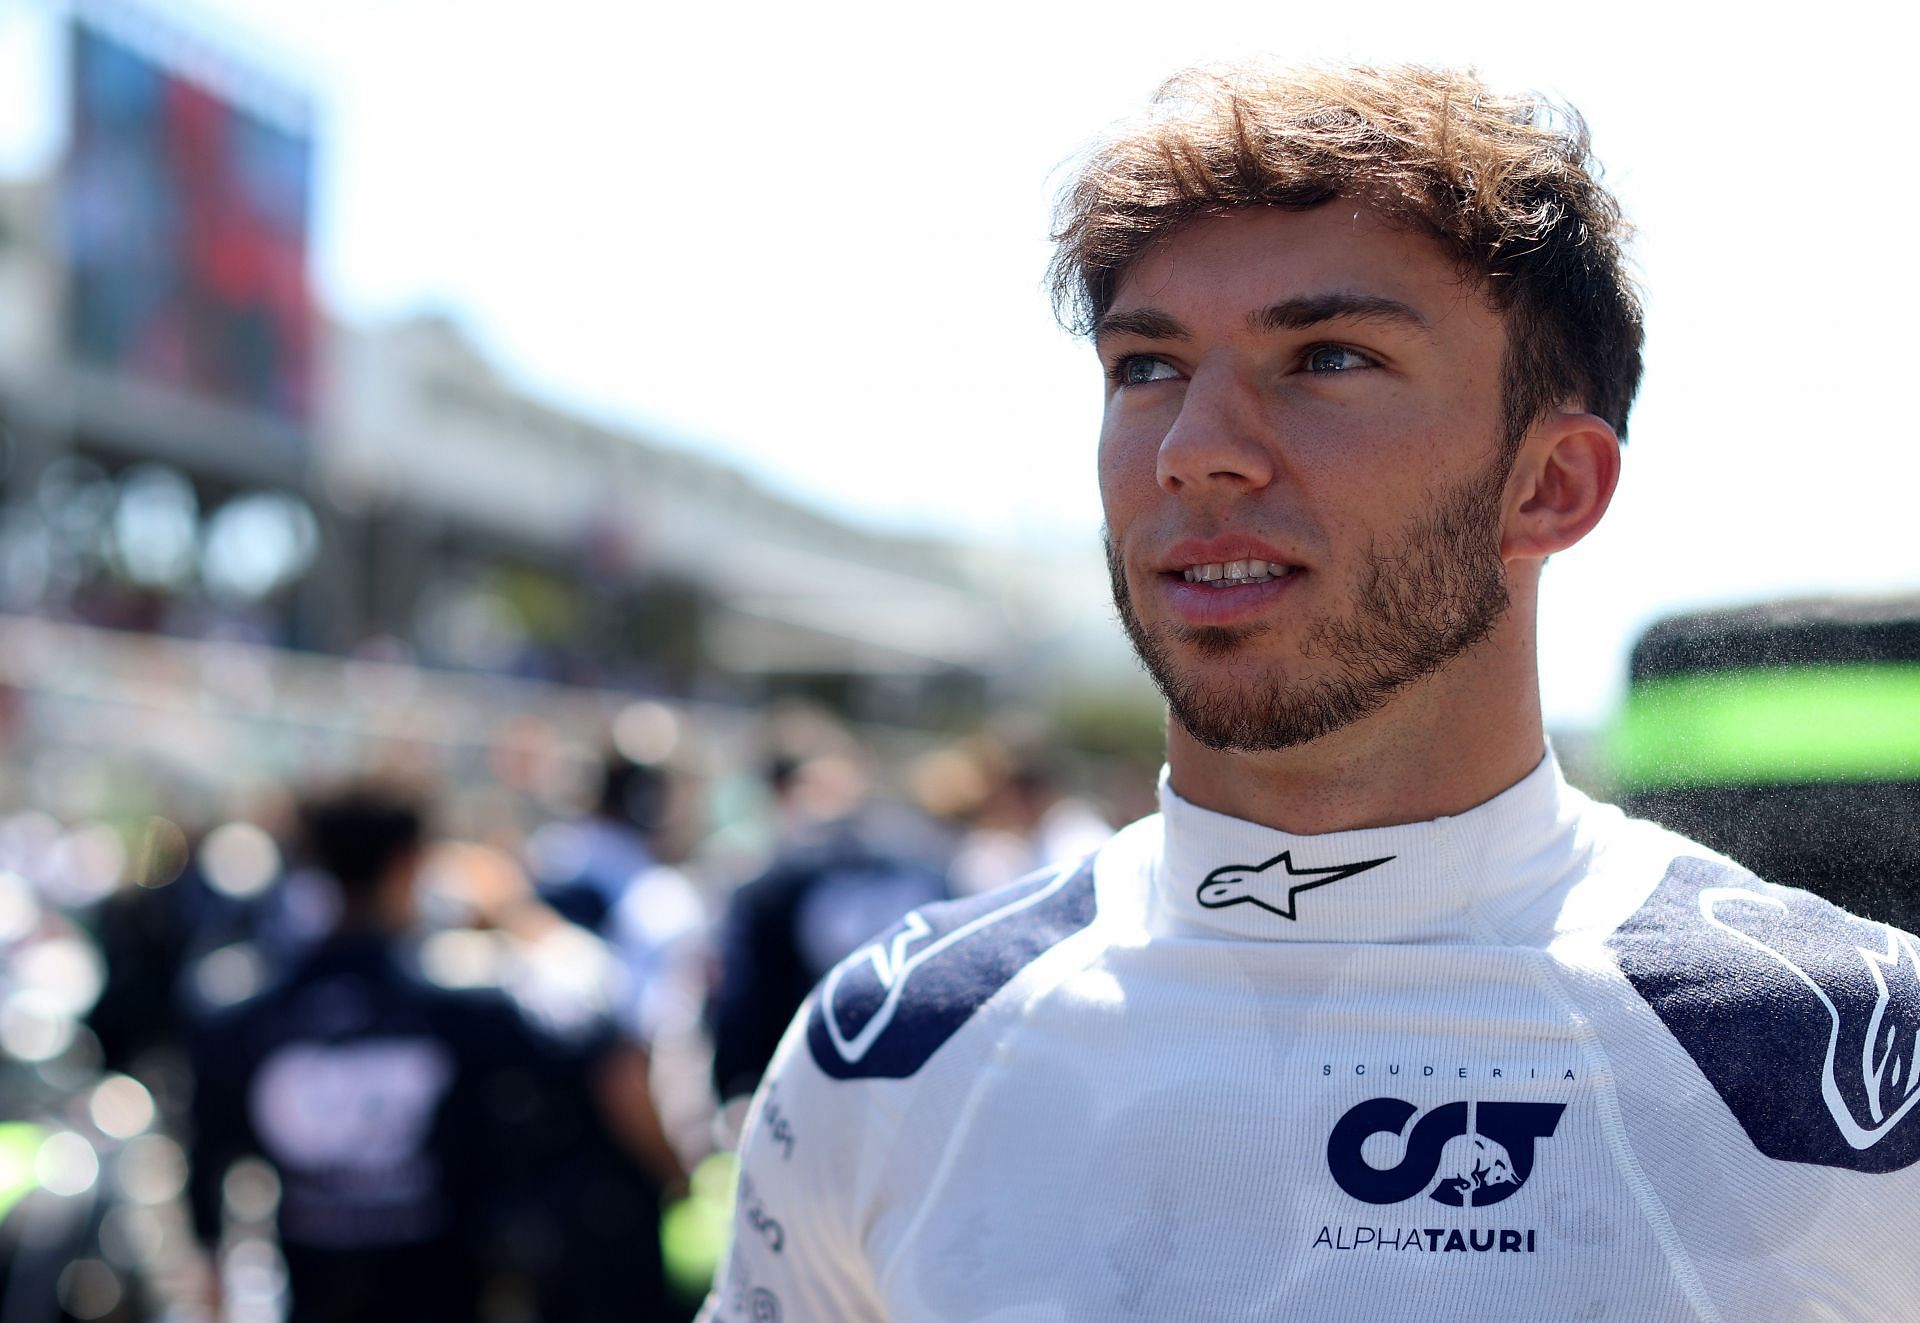 Pierre Gasly scored his best points finish of the season